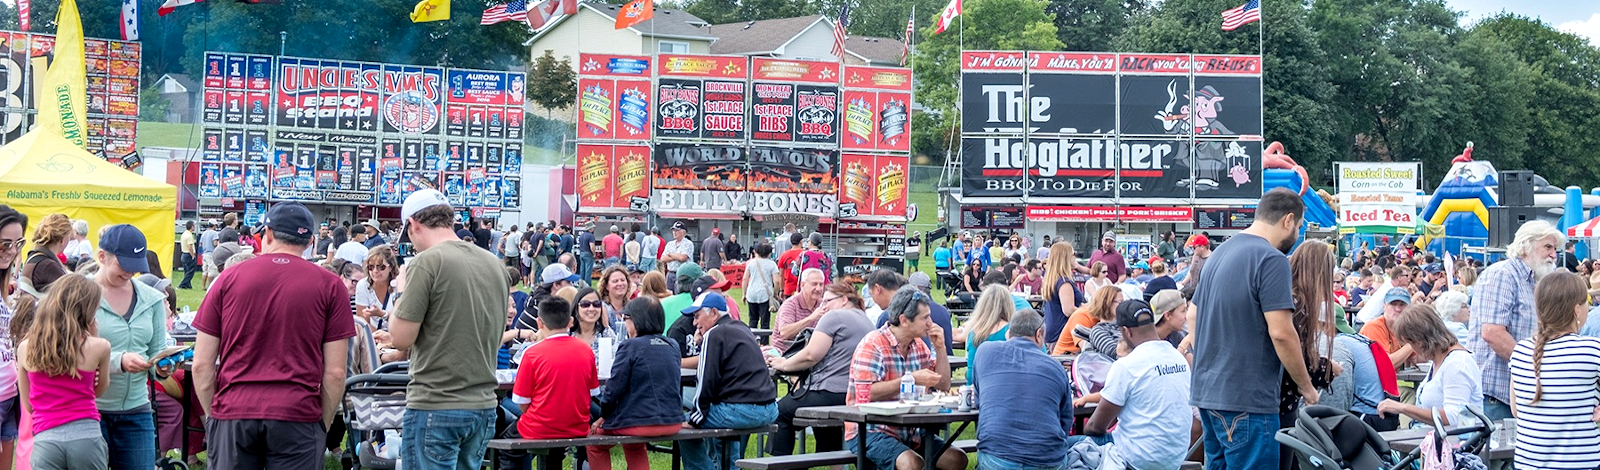 Ribfest food vendors and people at event